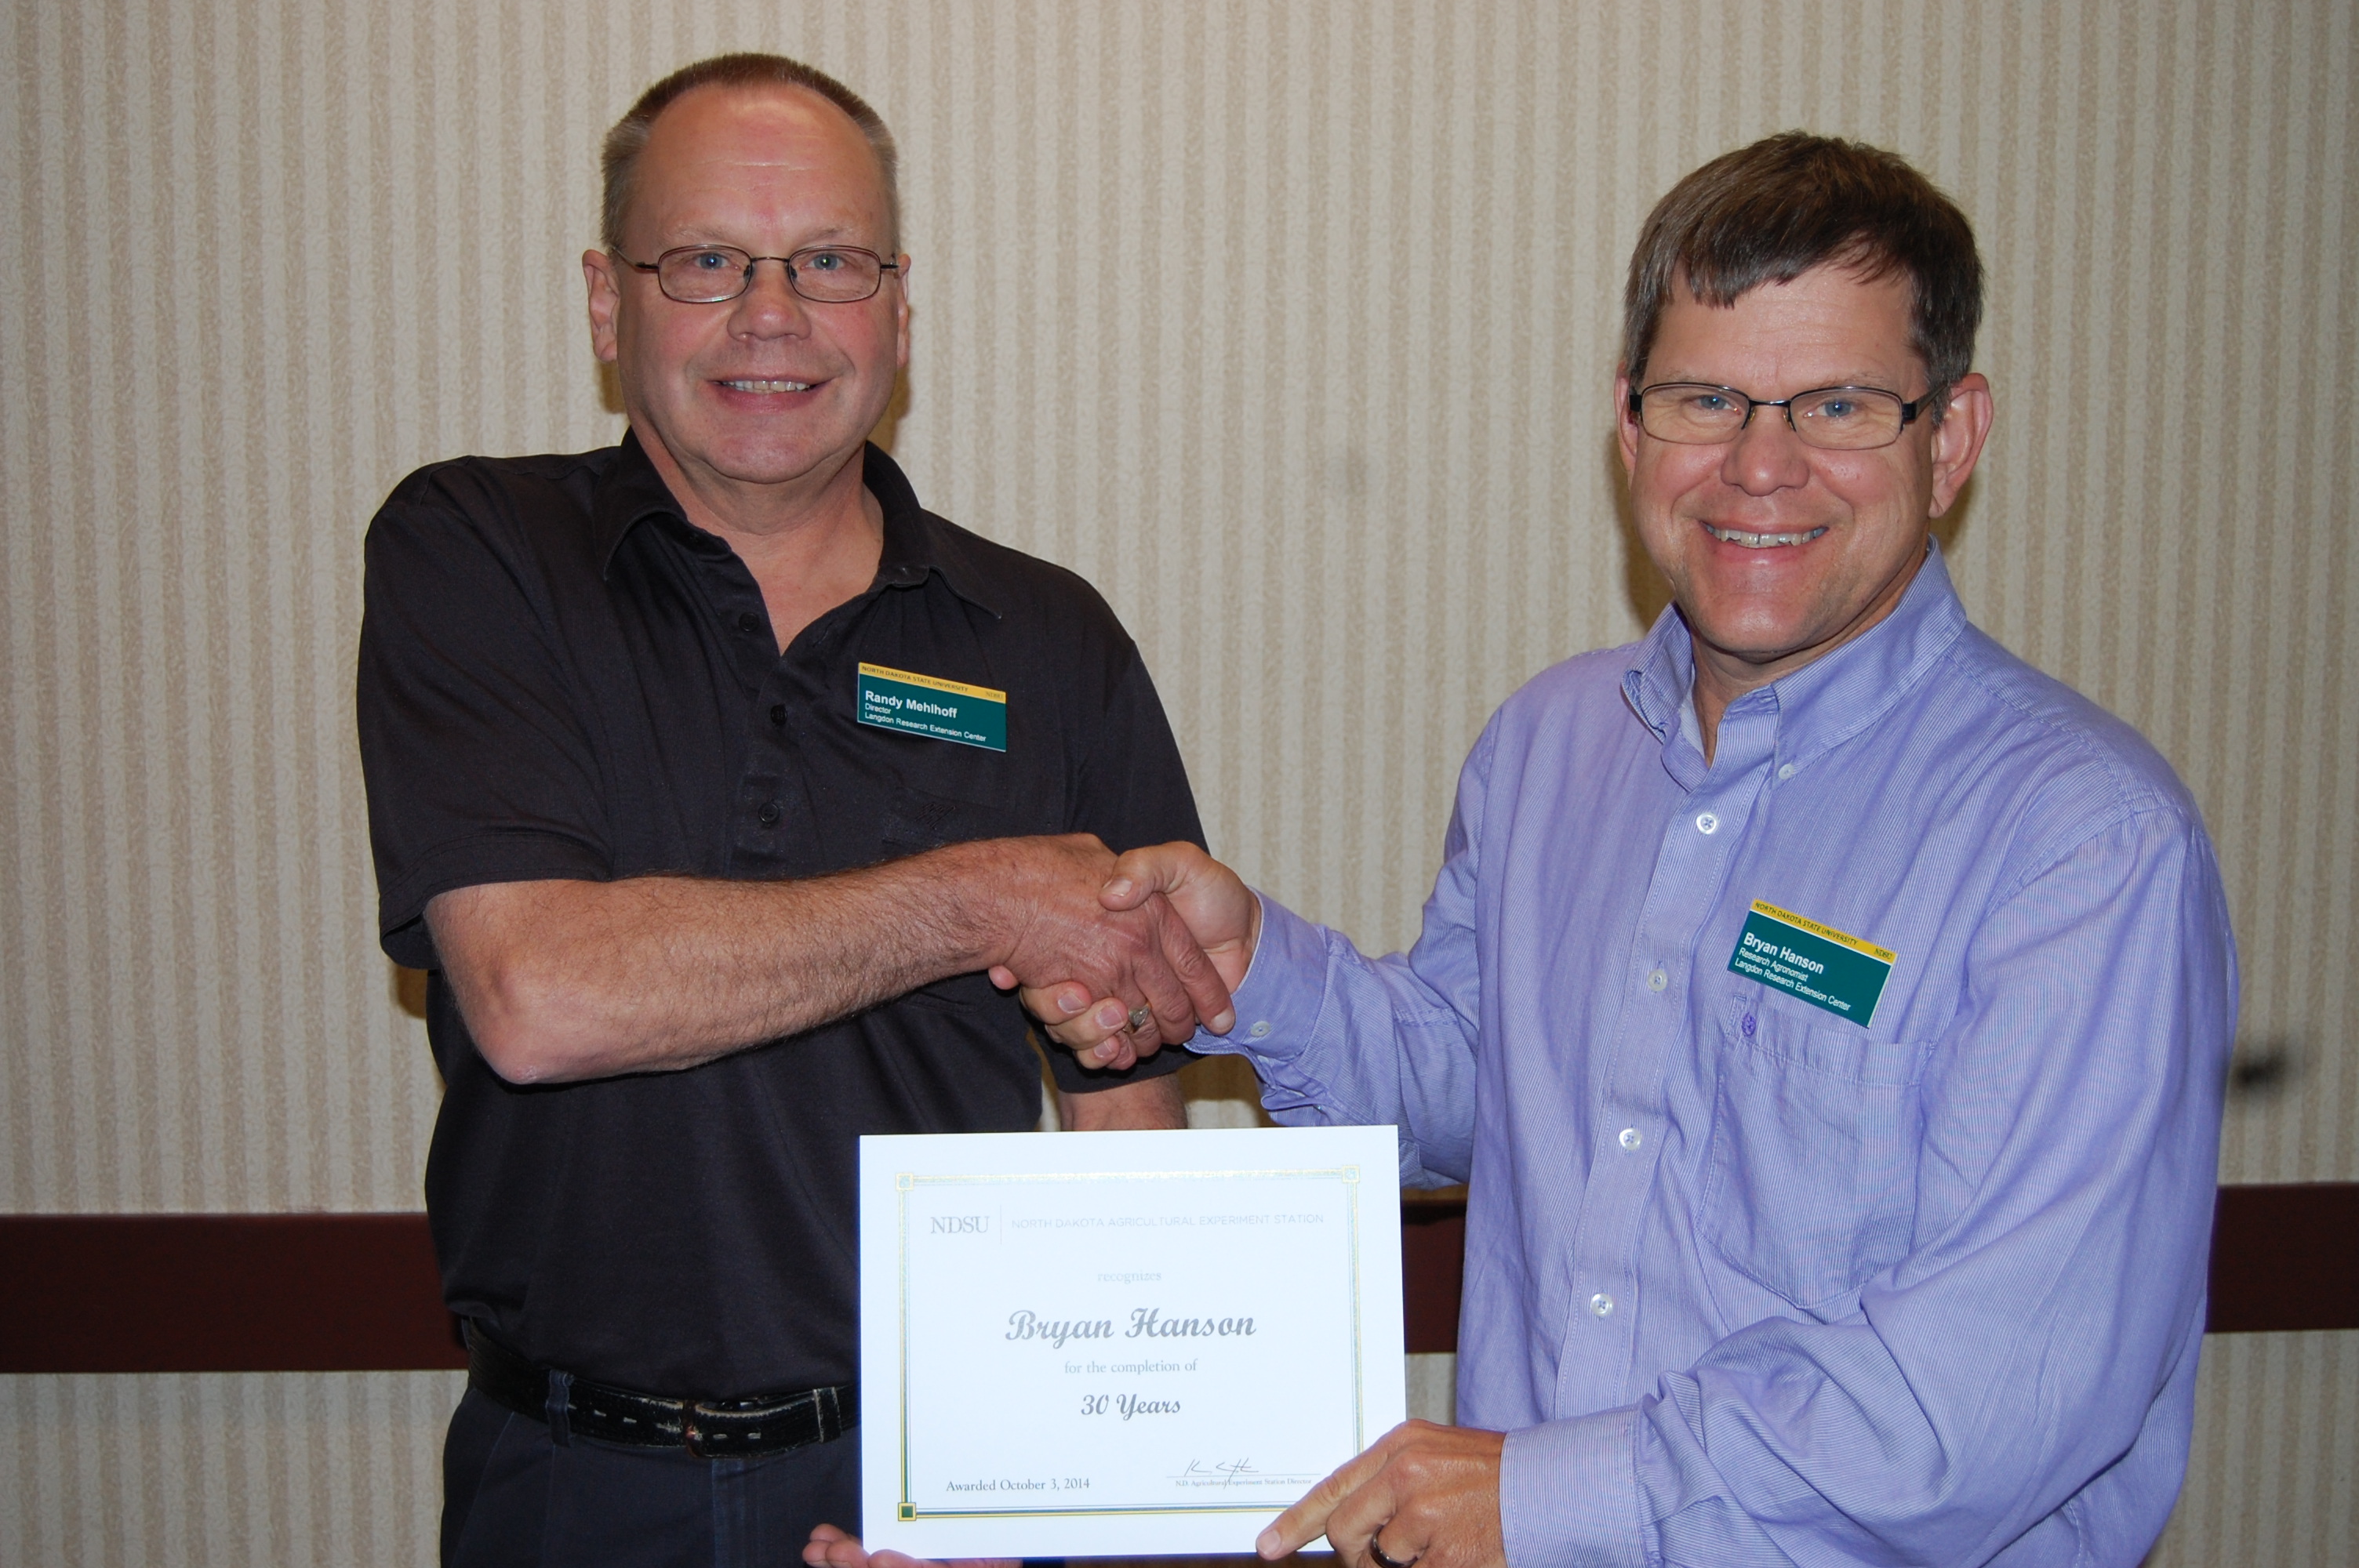 Randy Mehlhoff, Langdon Research Extension Center director (left), presents the award to Bryan Hanson.